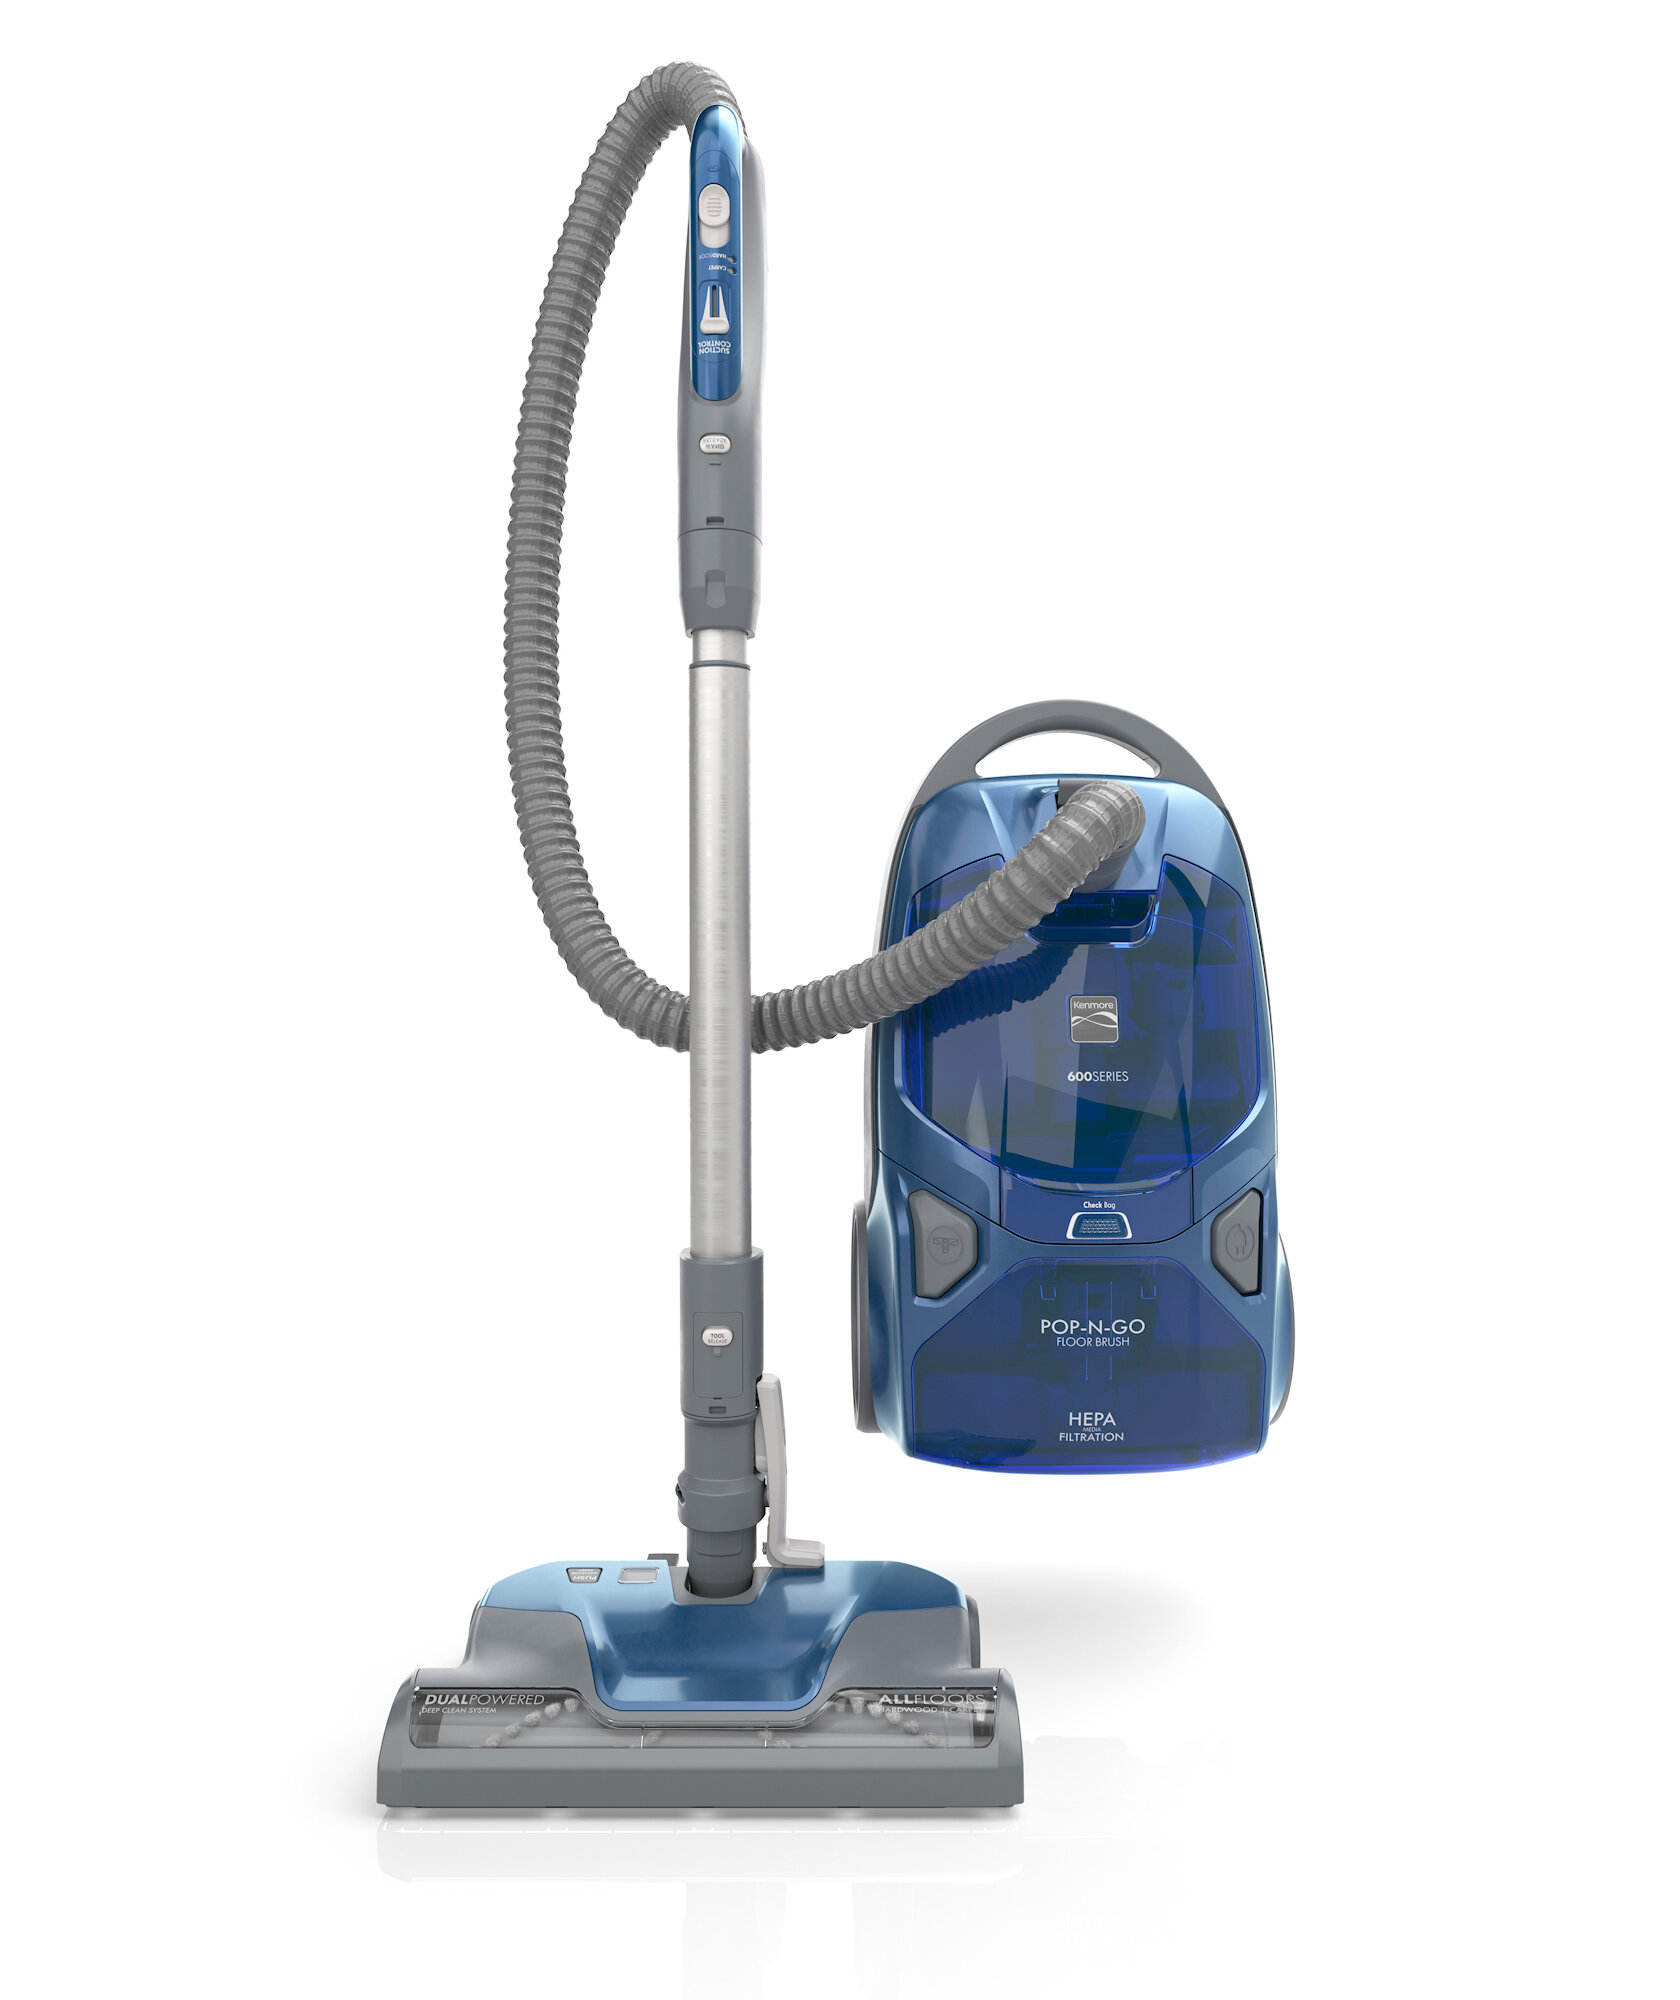 Kenmore BC4026 Pet Friendly Pop-N-Go Bagged Canister Vacuum